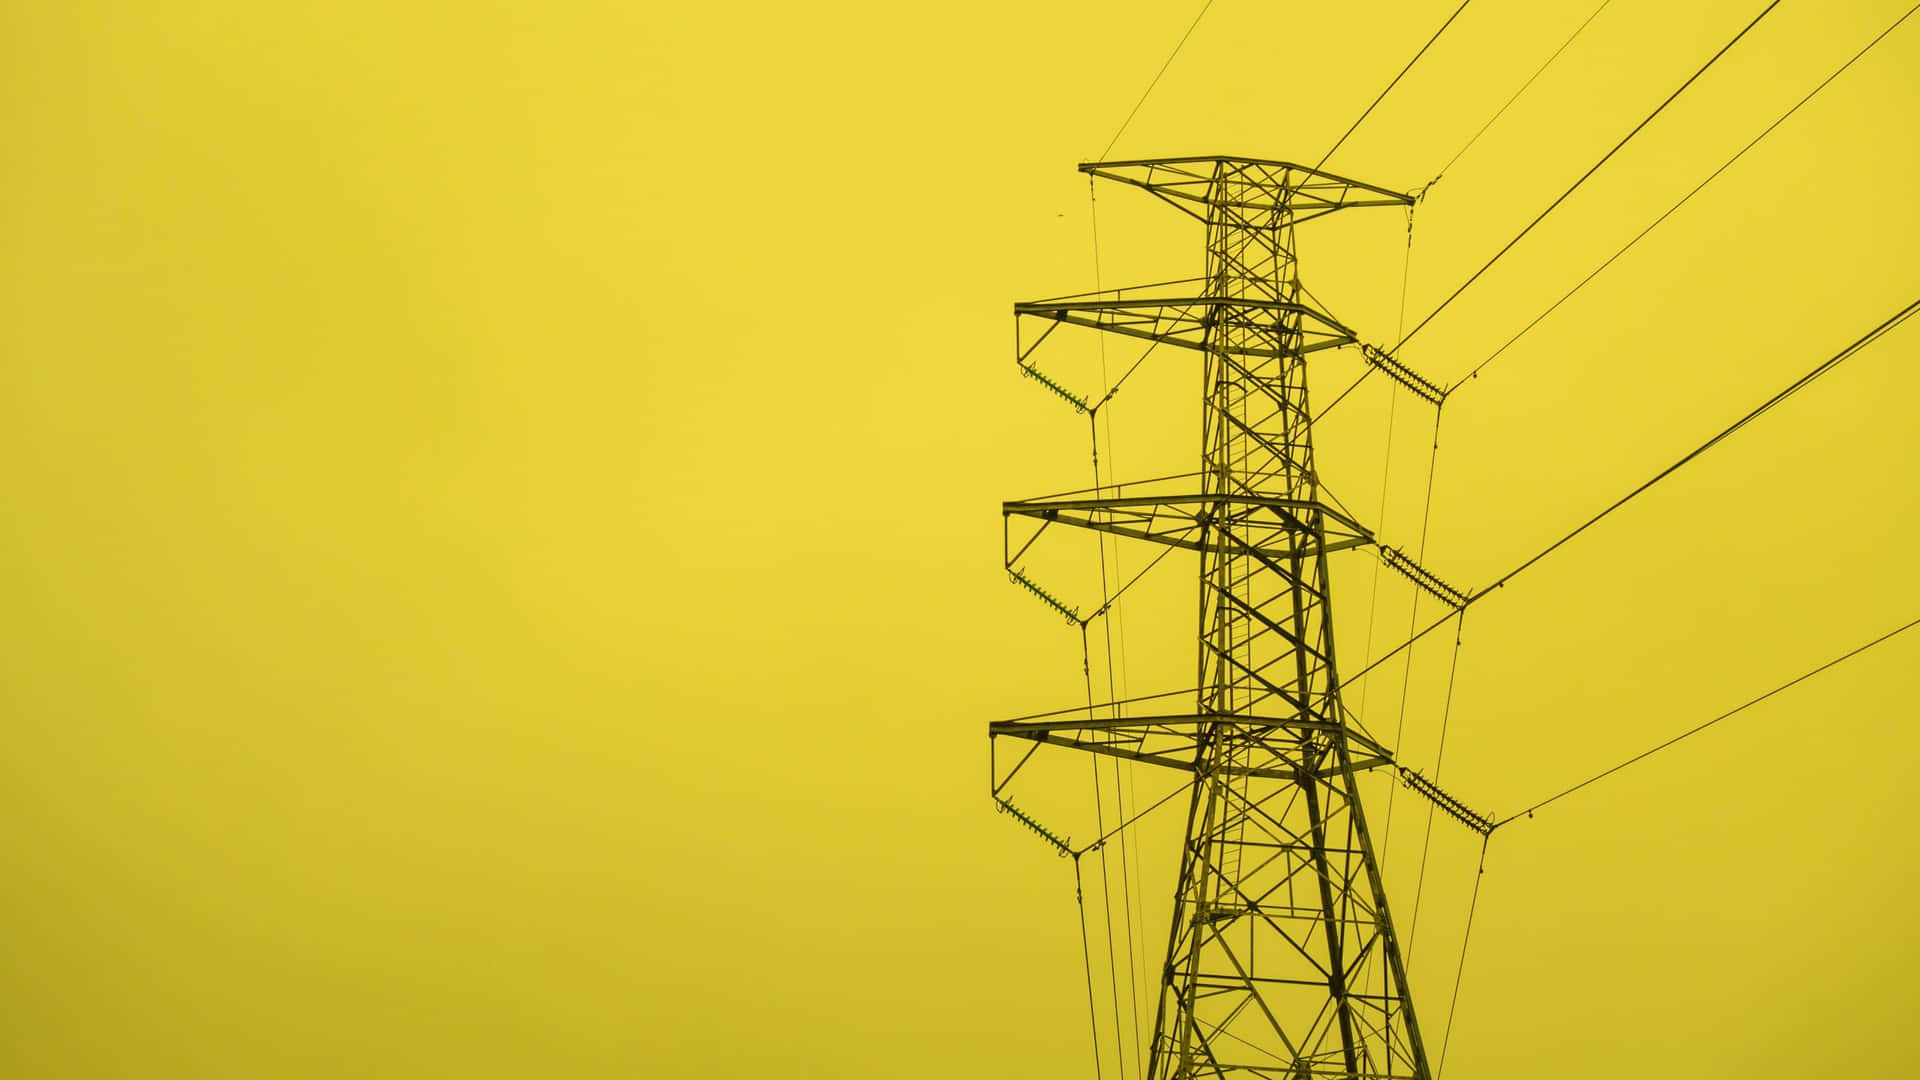 A High Voltage Pylon Against A Yellow Sky